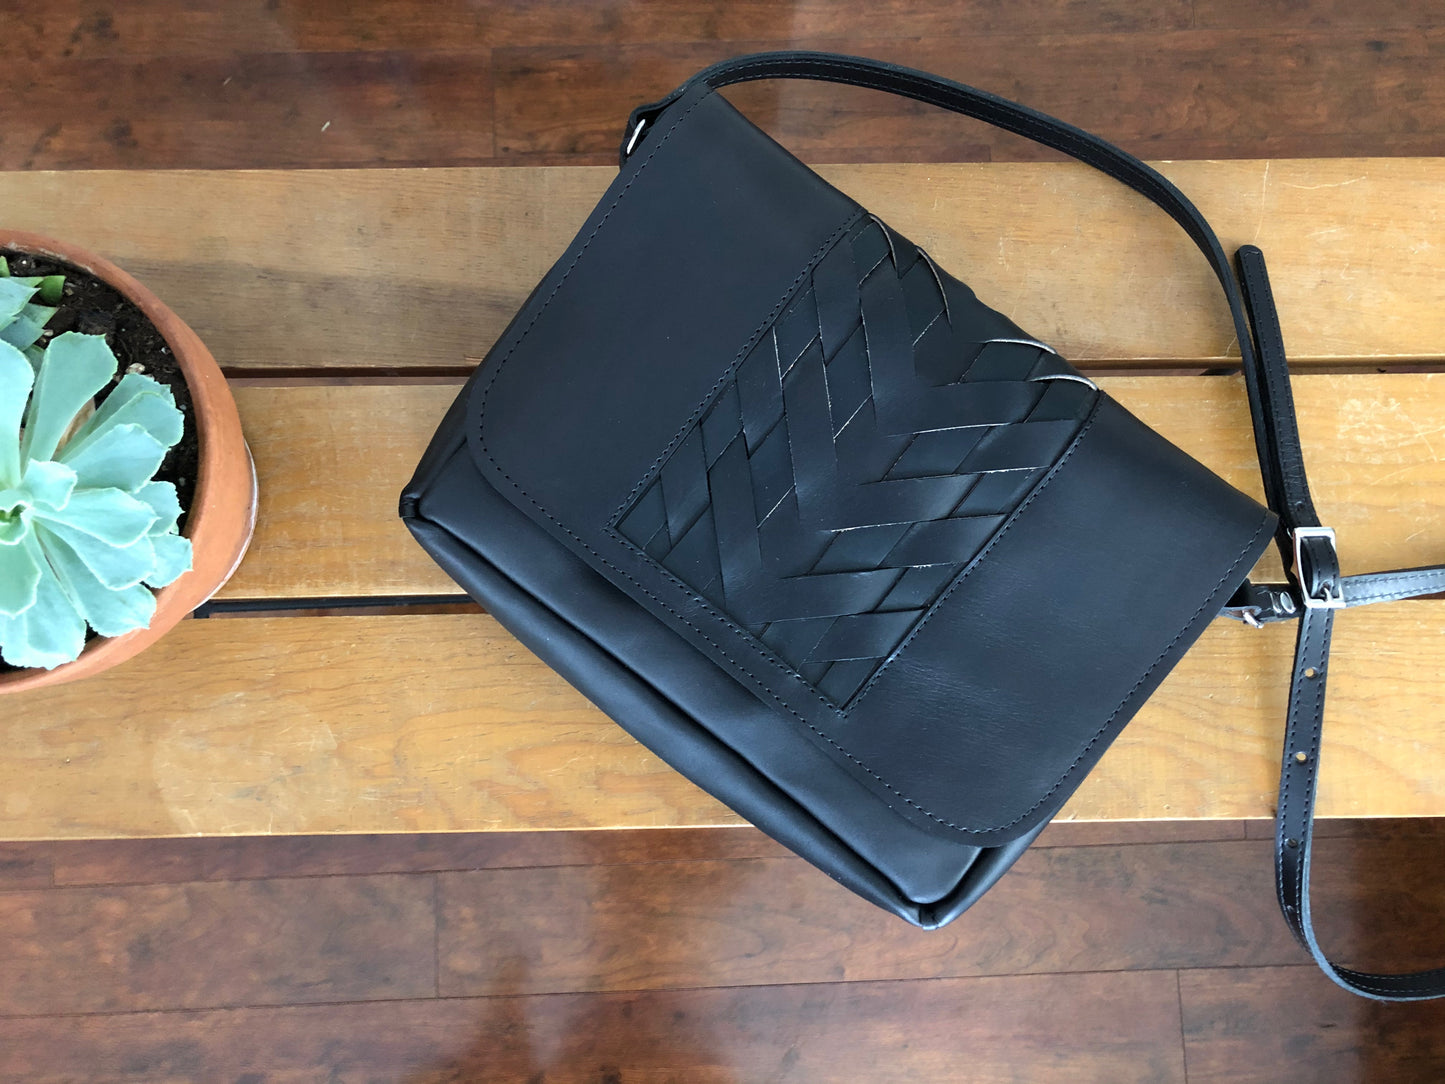 Black leather crossbody bag with woven center panel, lies on wooden table.